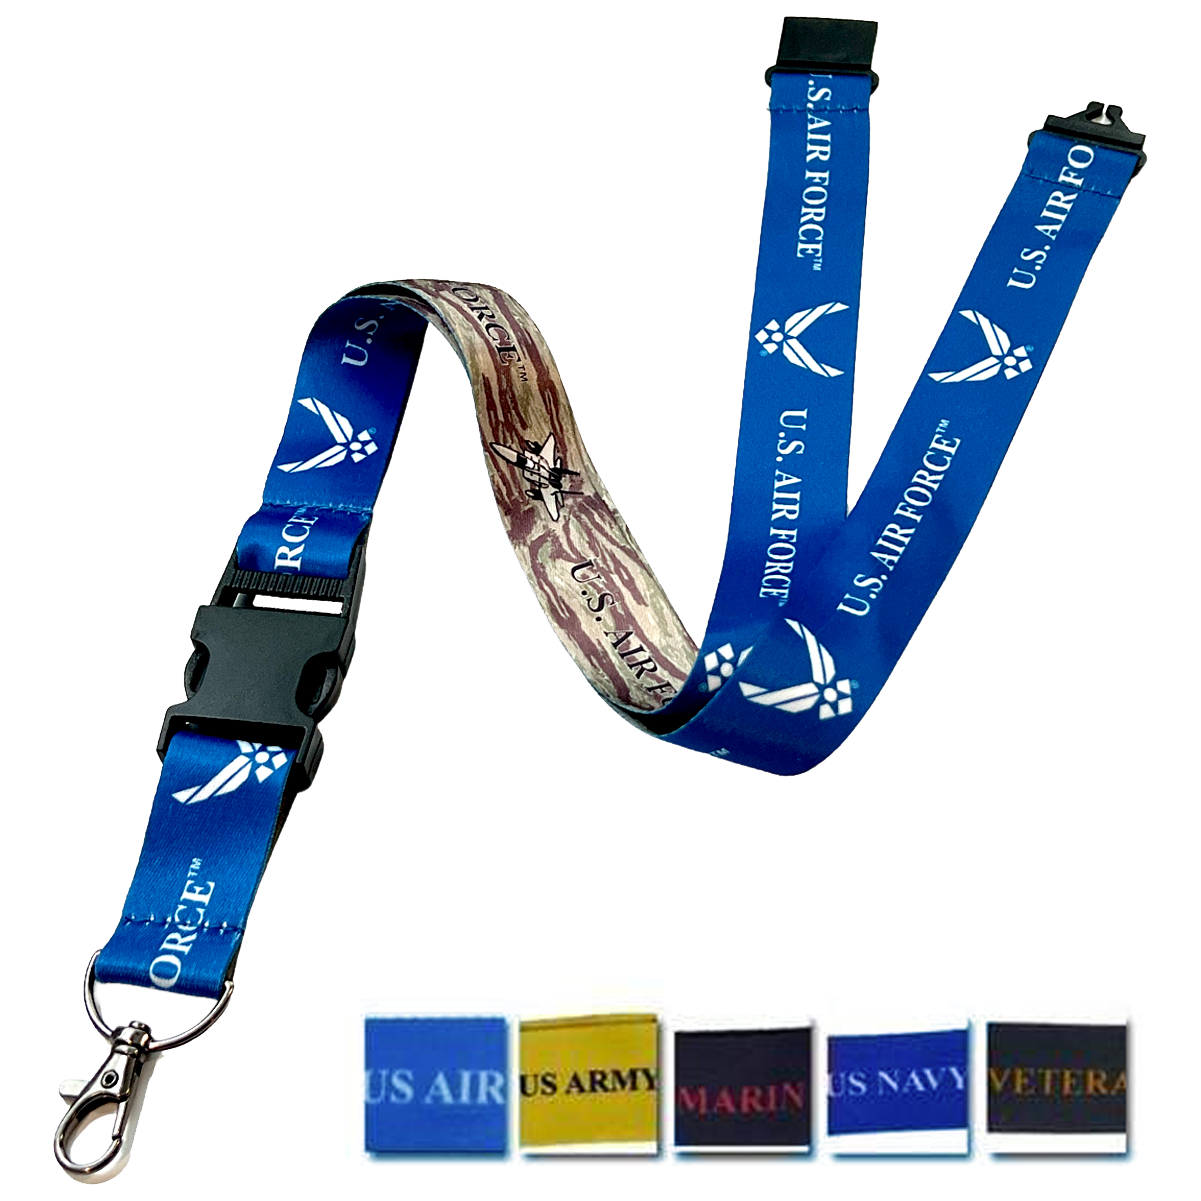 US Air Force Lanyard Reversible Military Design Lanyards with Breakaway and Detachable Buckle Keychain